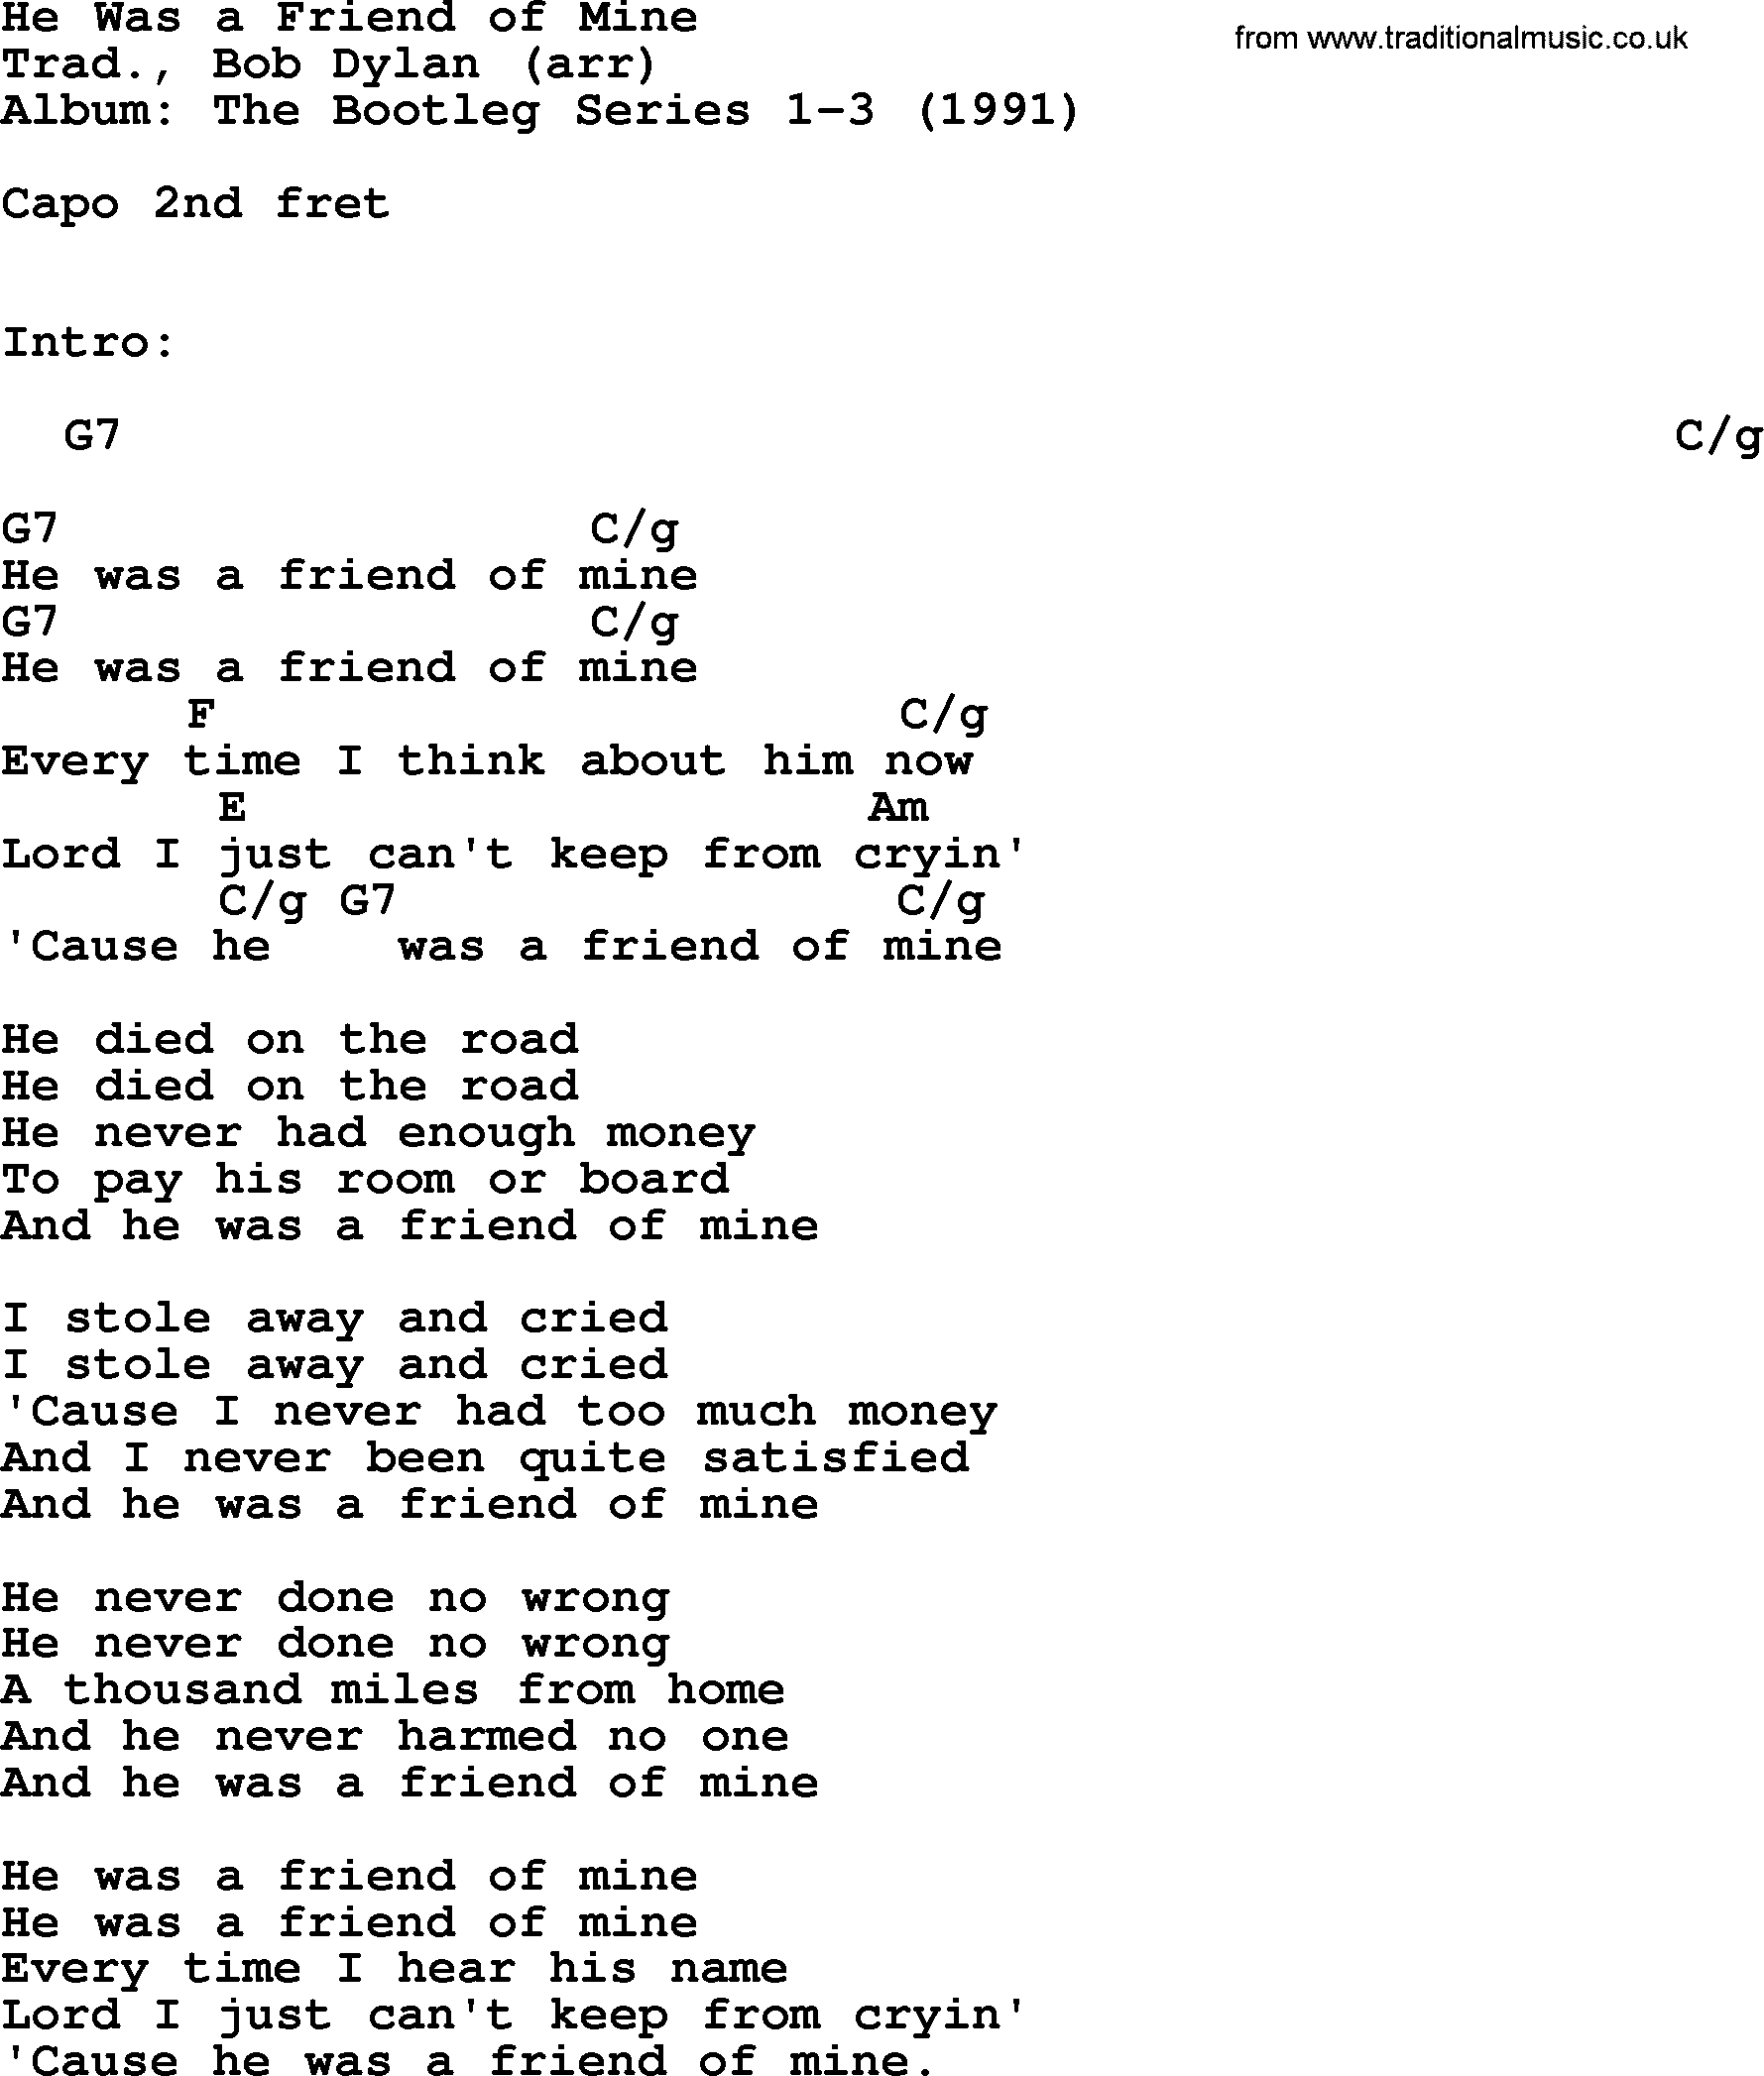 Bob Dylan song, lyrics with chords - He Was a Friend of Mine